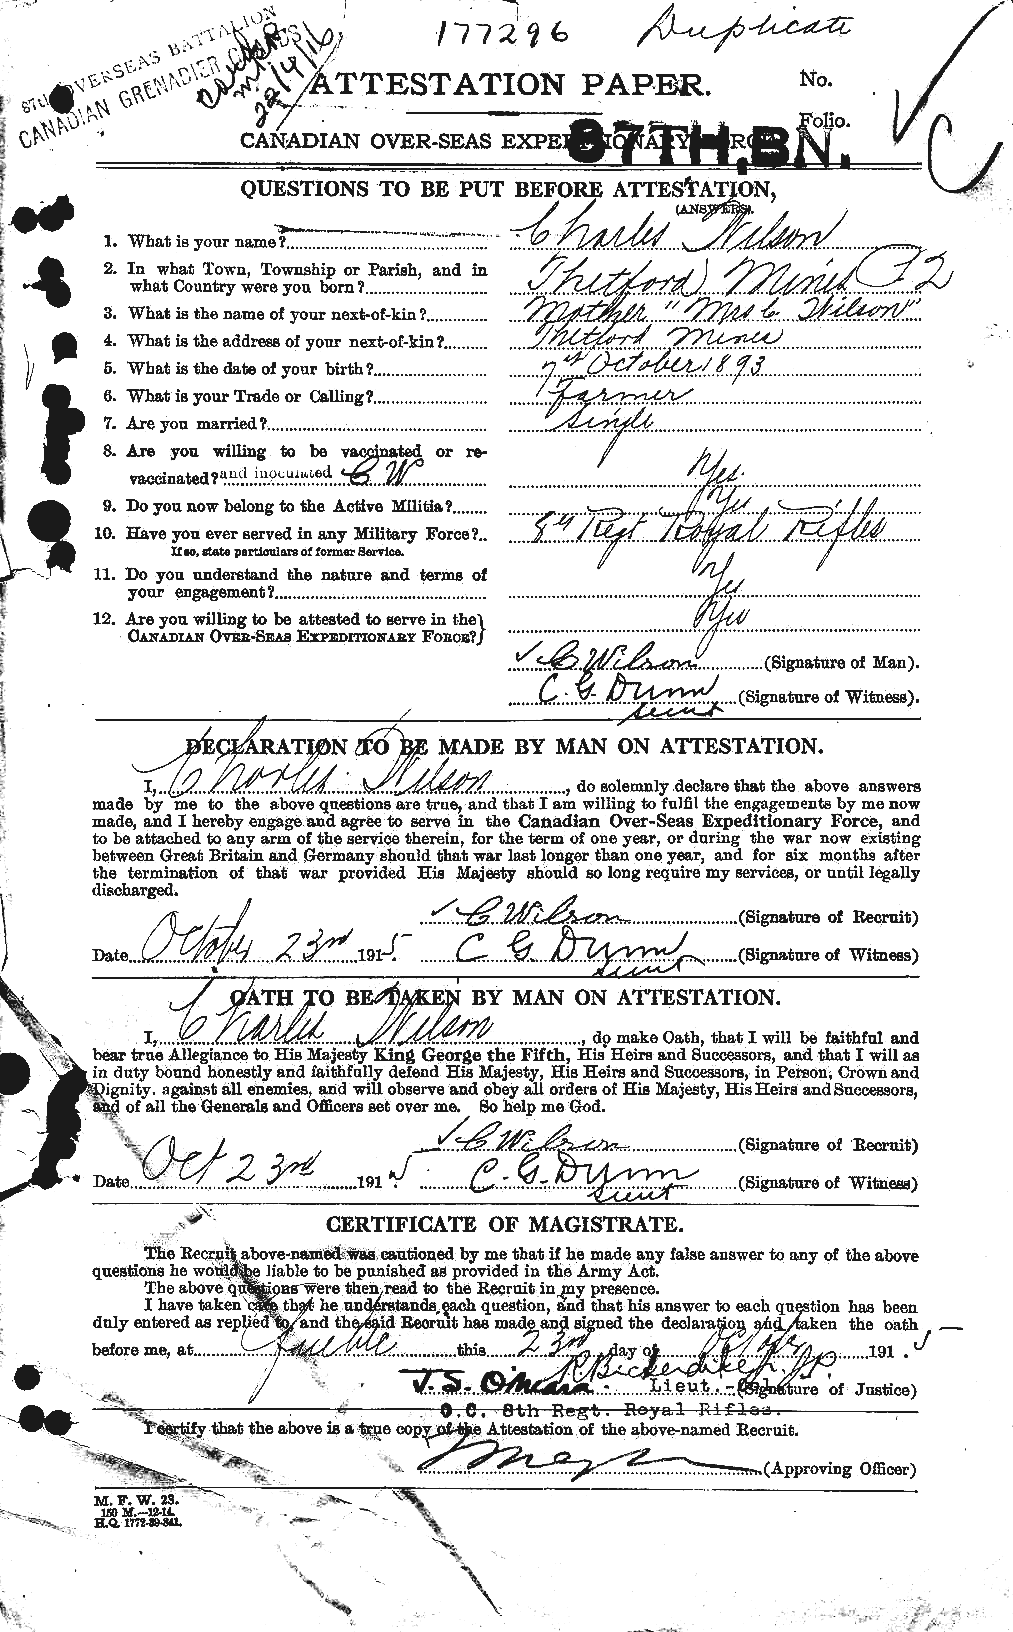 Personnel Records of the First World War - CEF 677870a